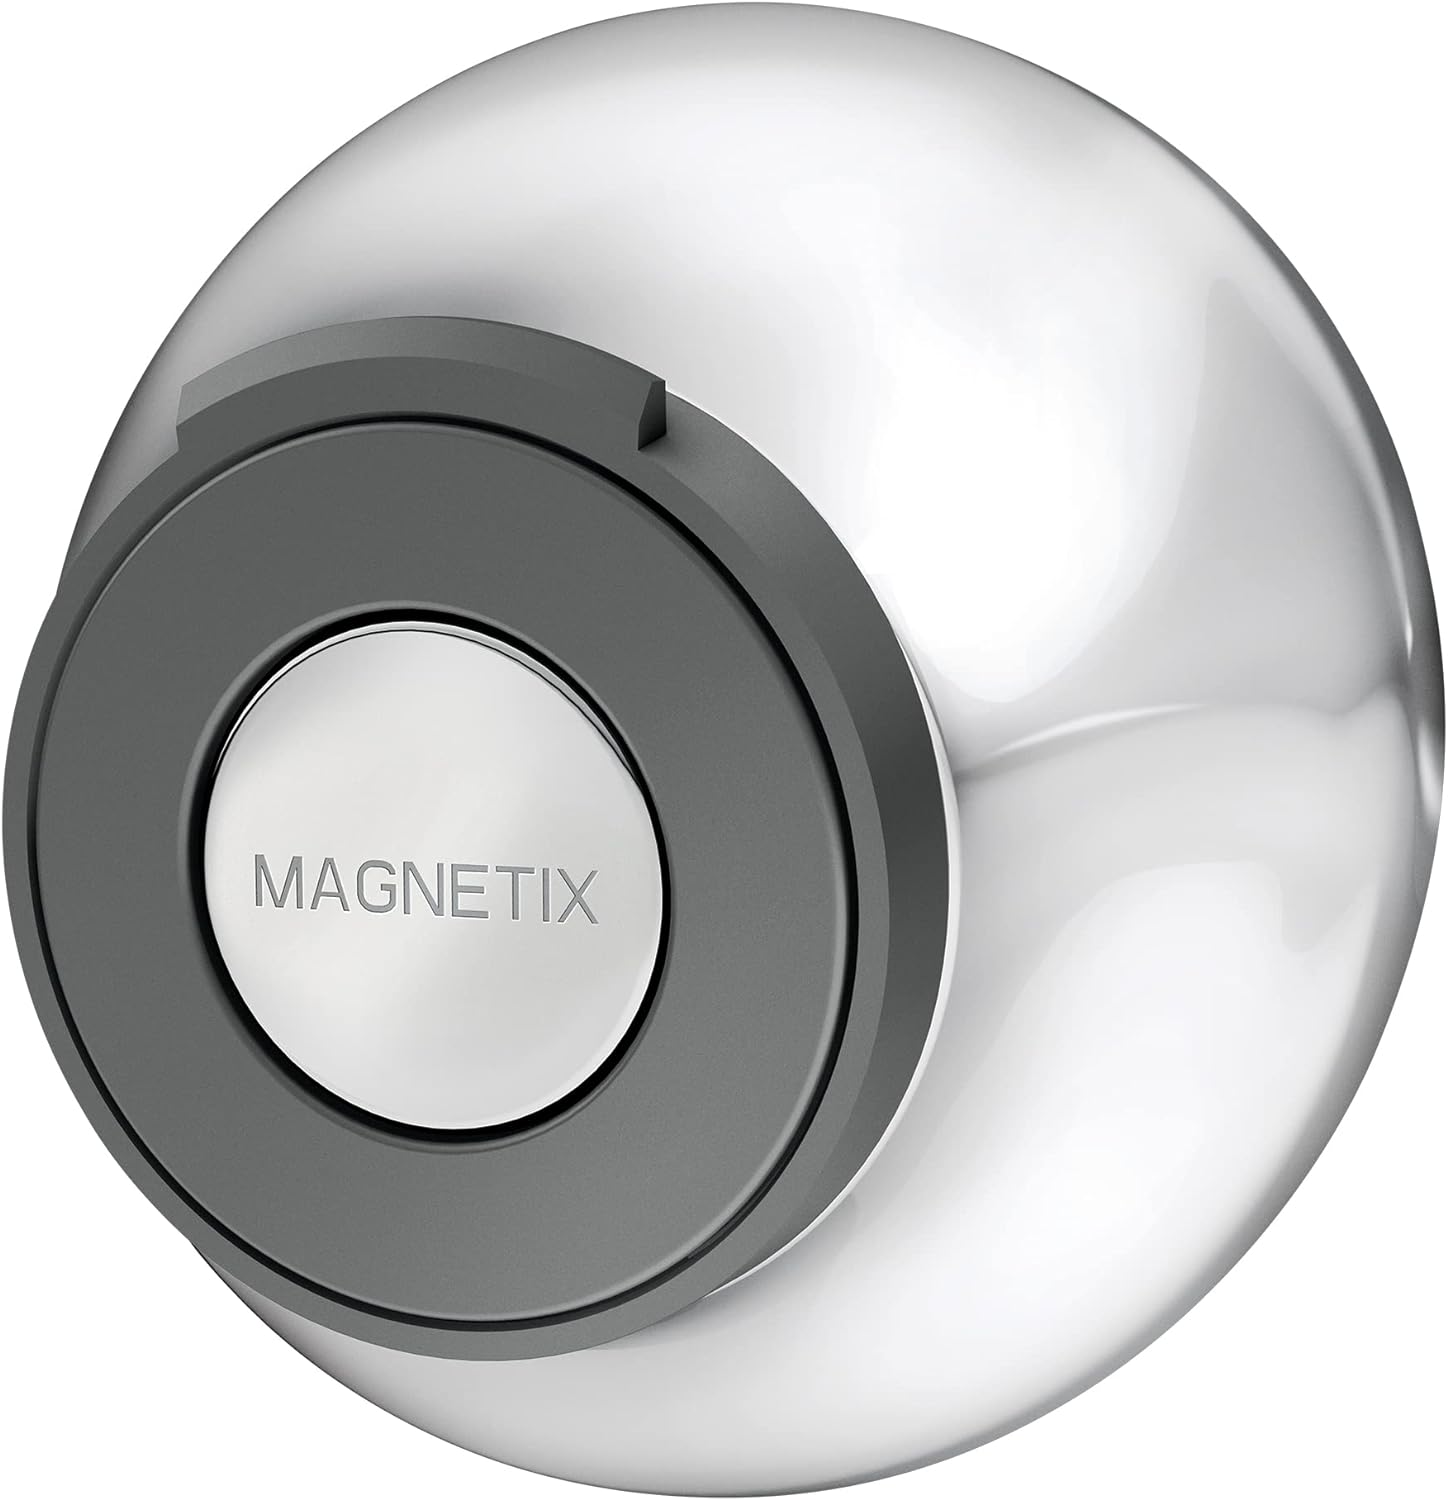 Moen Chrome Remote Dock for Magnetix Removable Handshowers with Included Wall Bracket or Permanent Waterproof Adhesive Options, 186117